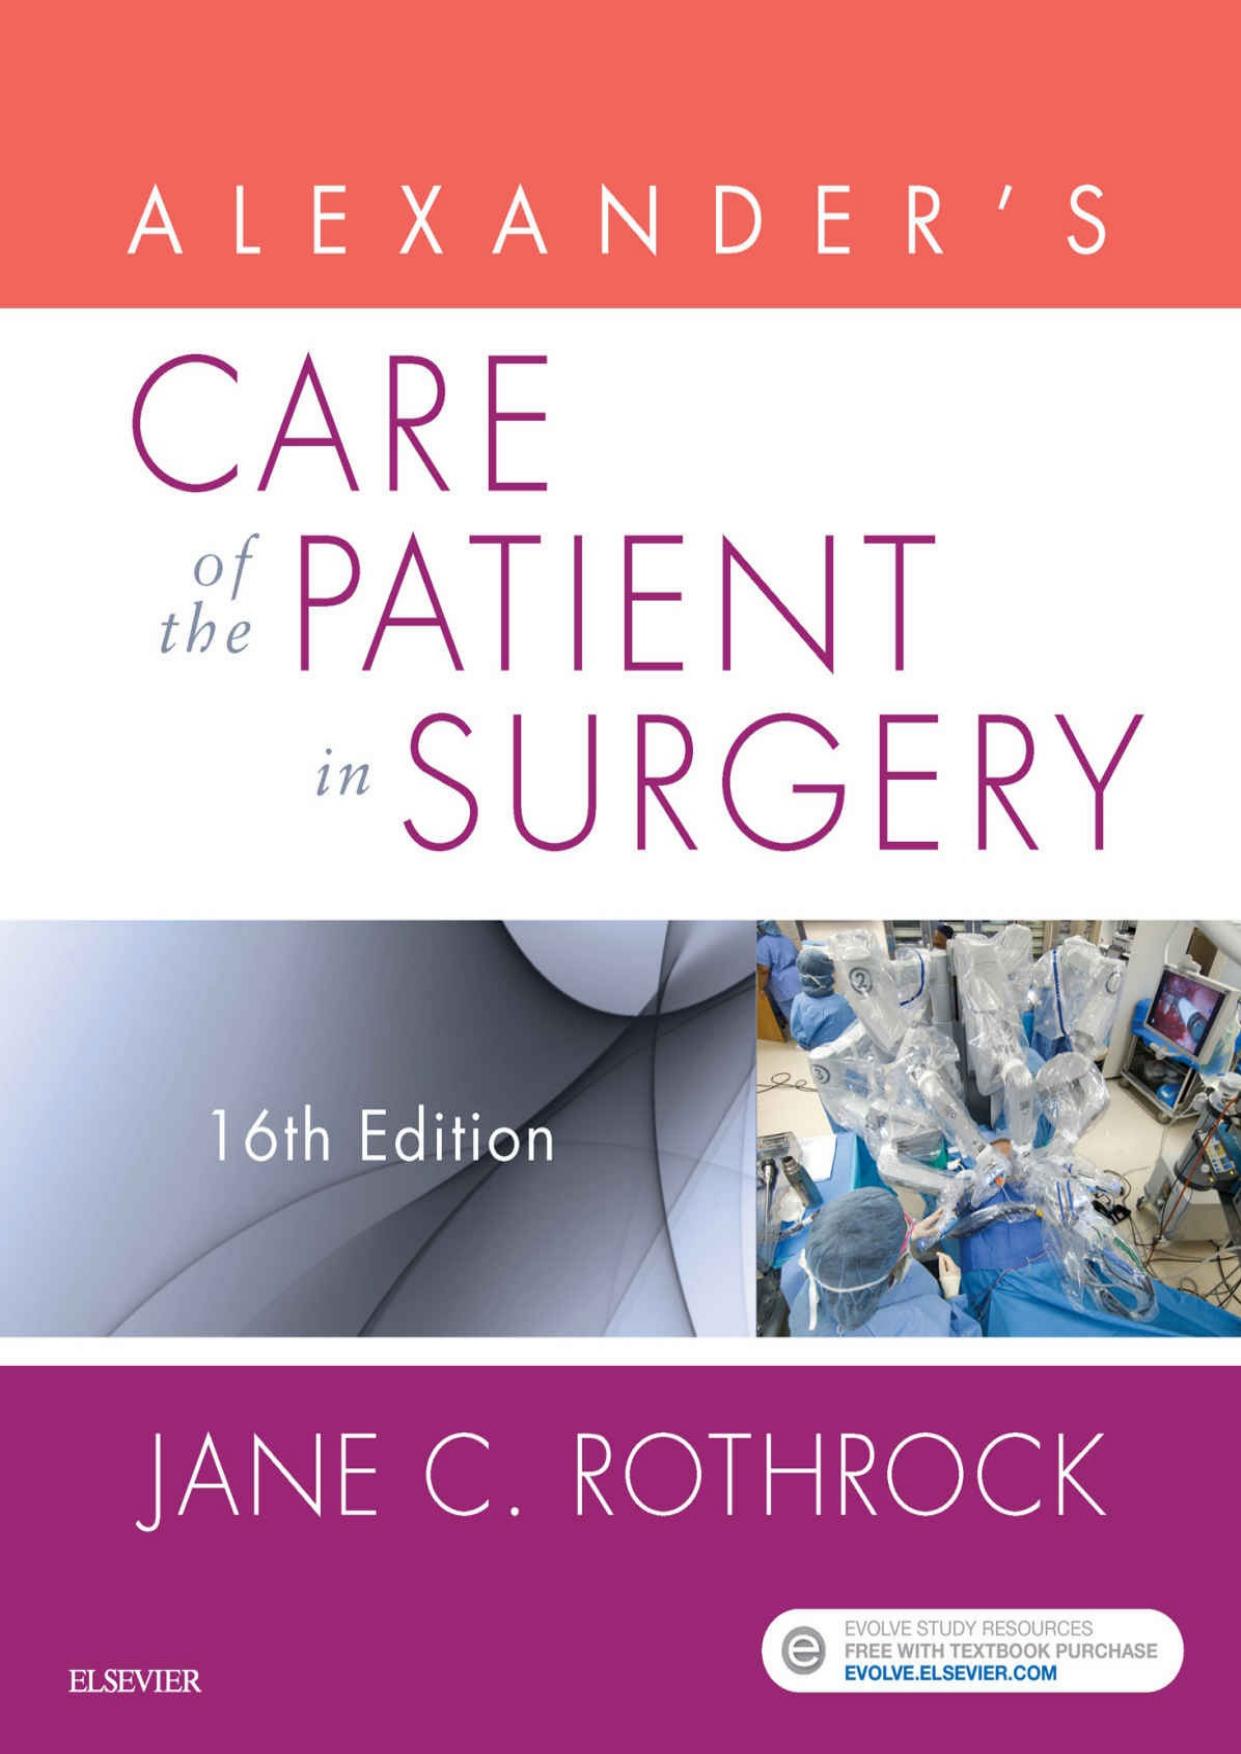 Alexander's Care of the Patient in Surgery - E-Book (Alexanders Care of the Patient in Surgery)